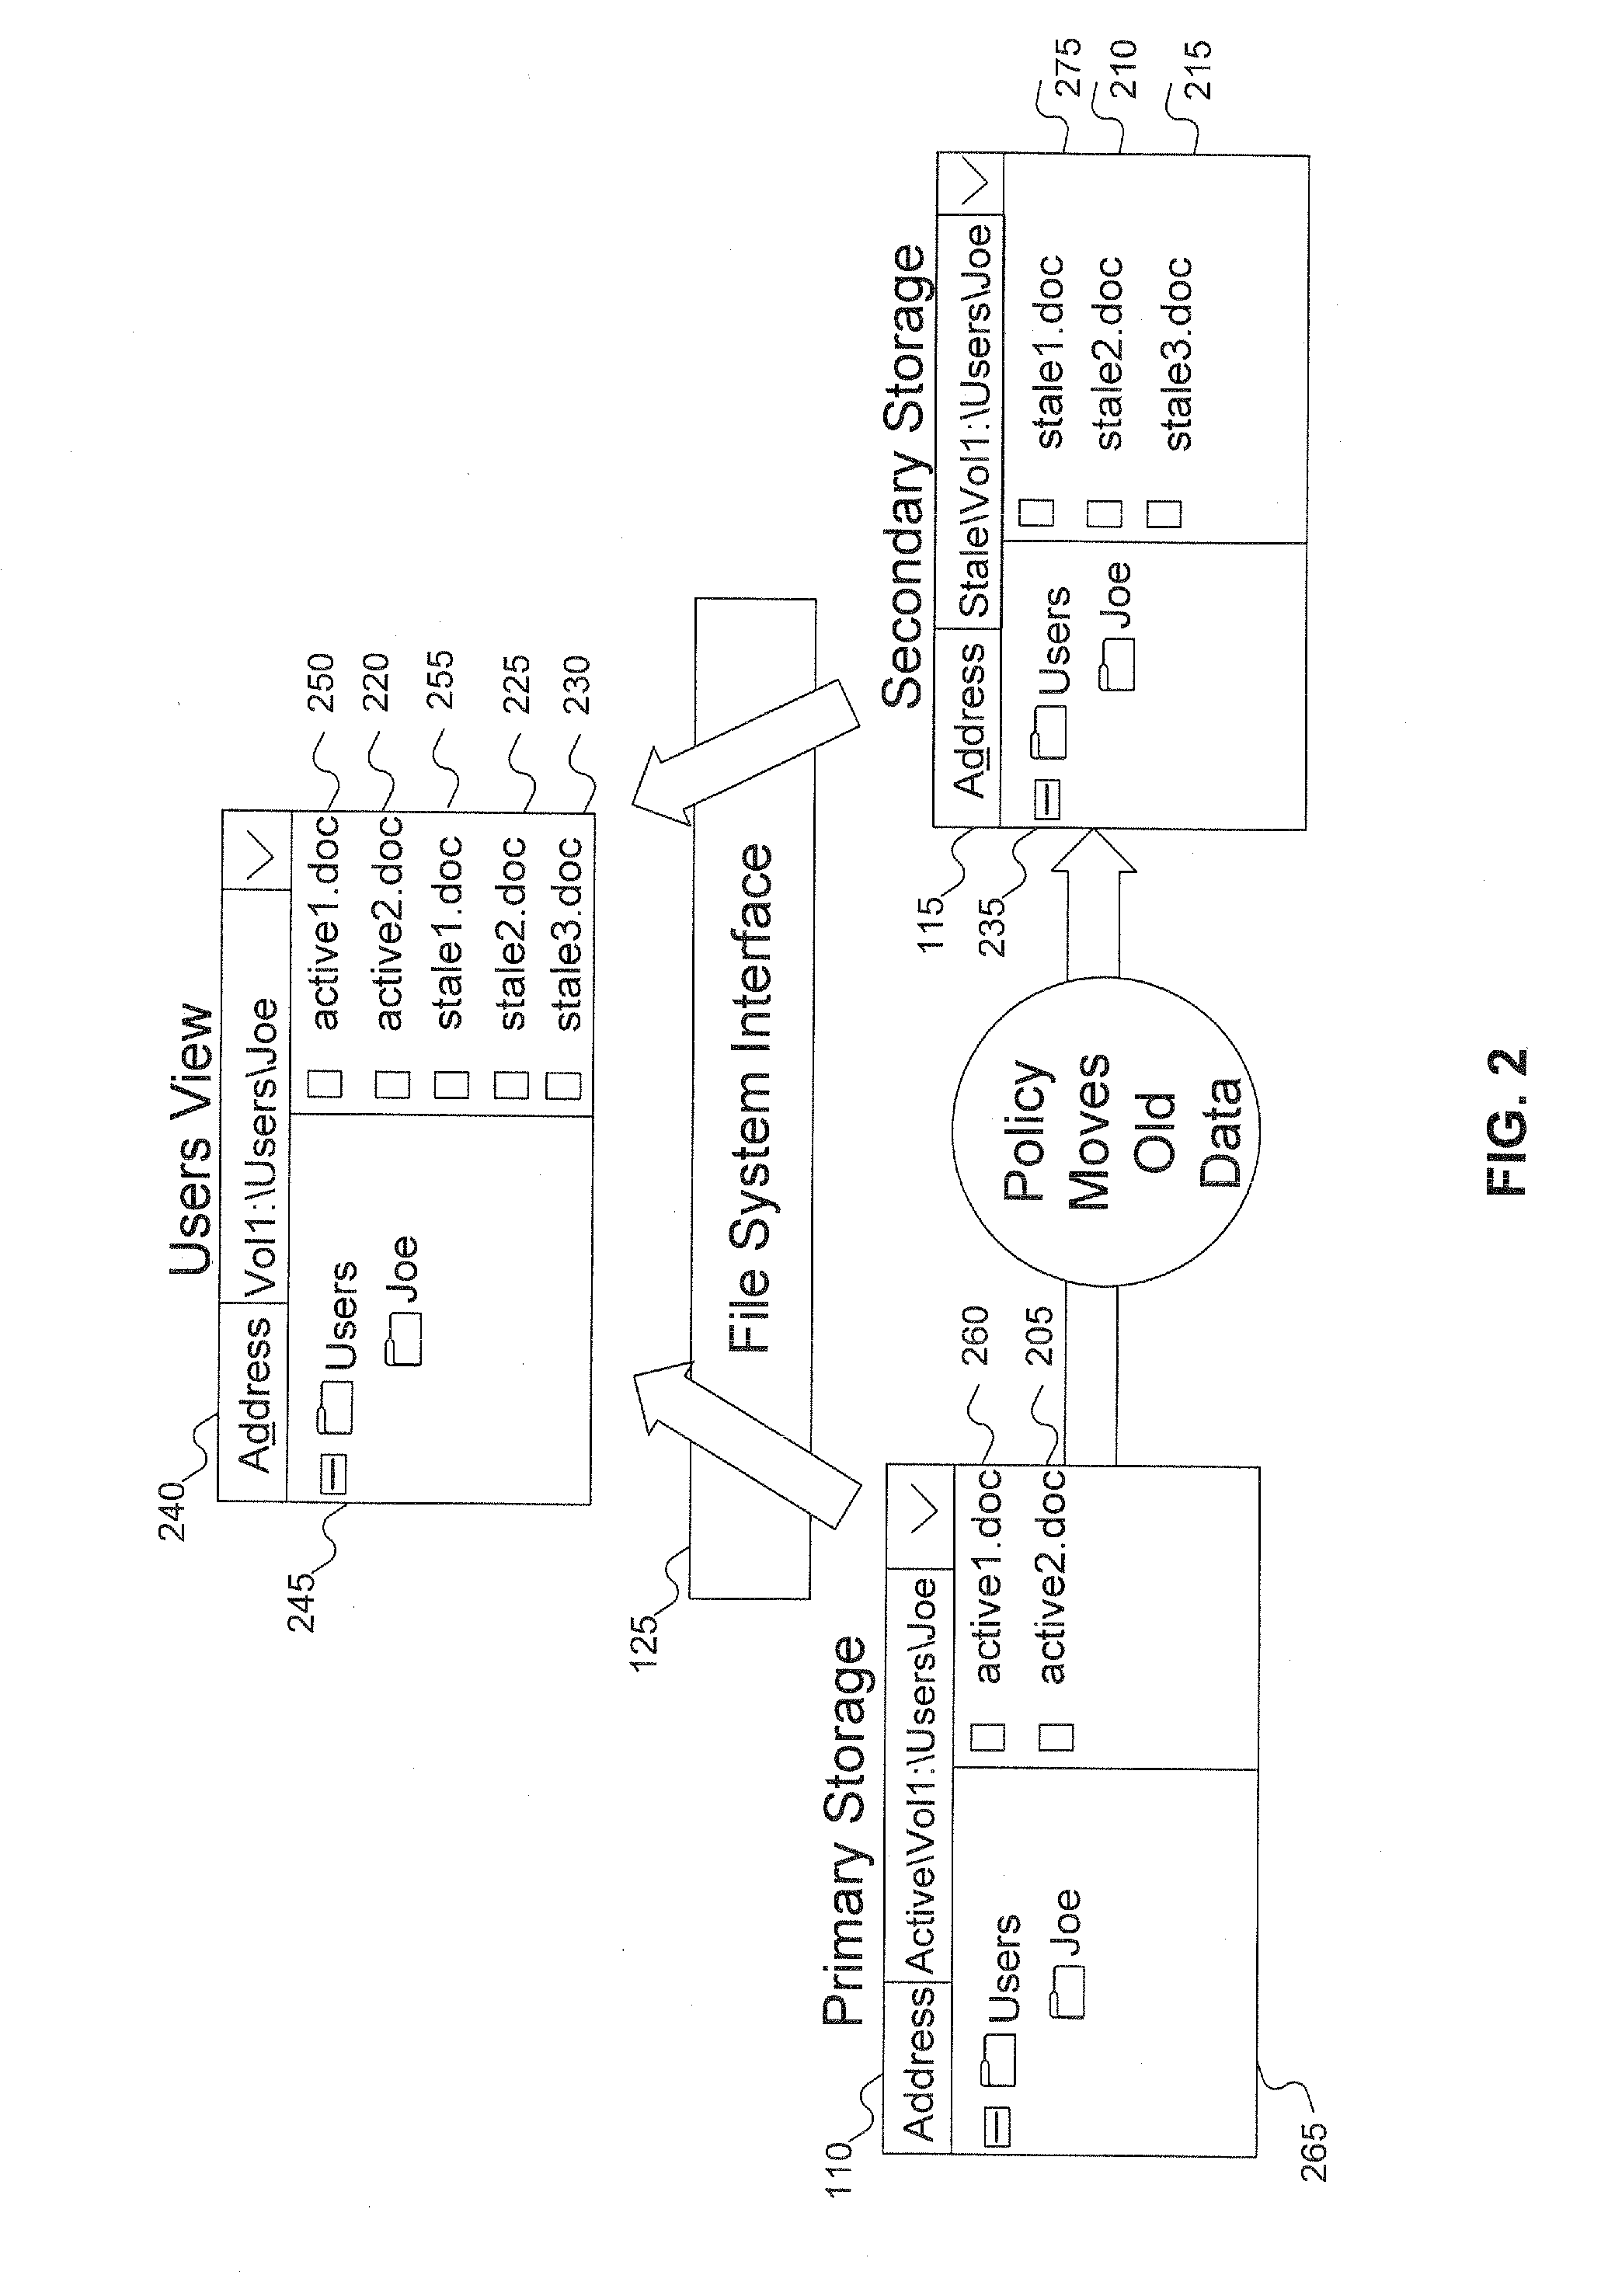 System and method for hierarchical storage management using shadow volumes